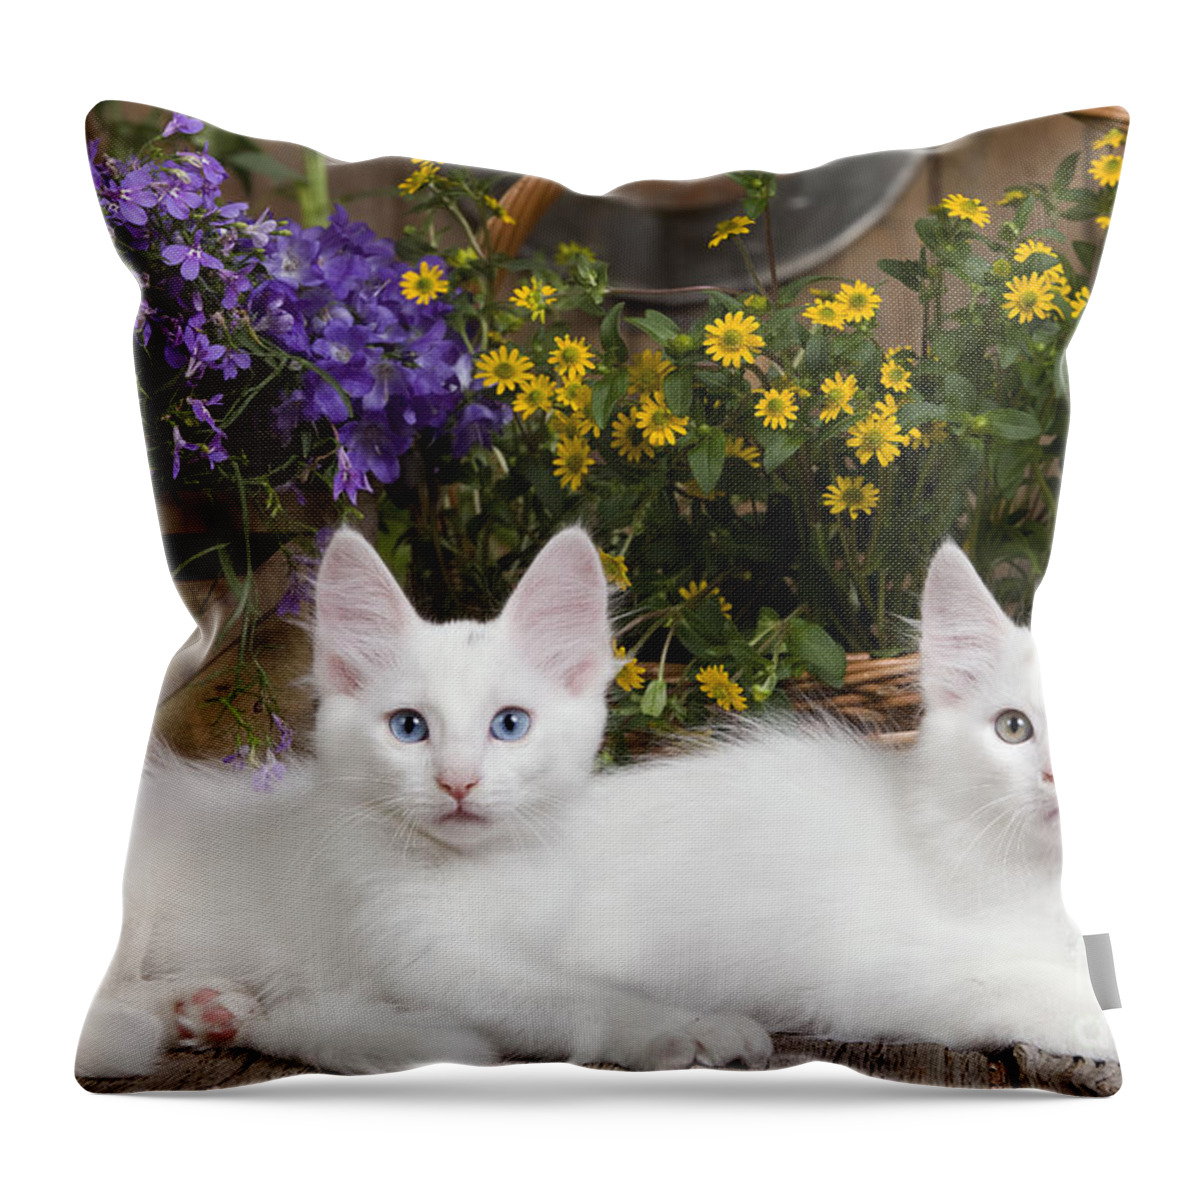 Cat Throw Pillow featuring the photograph Turkish Angora Kittens by Jean-Michel Labat